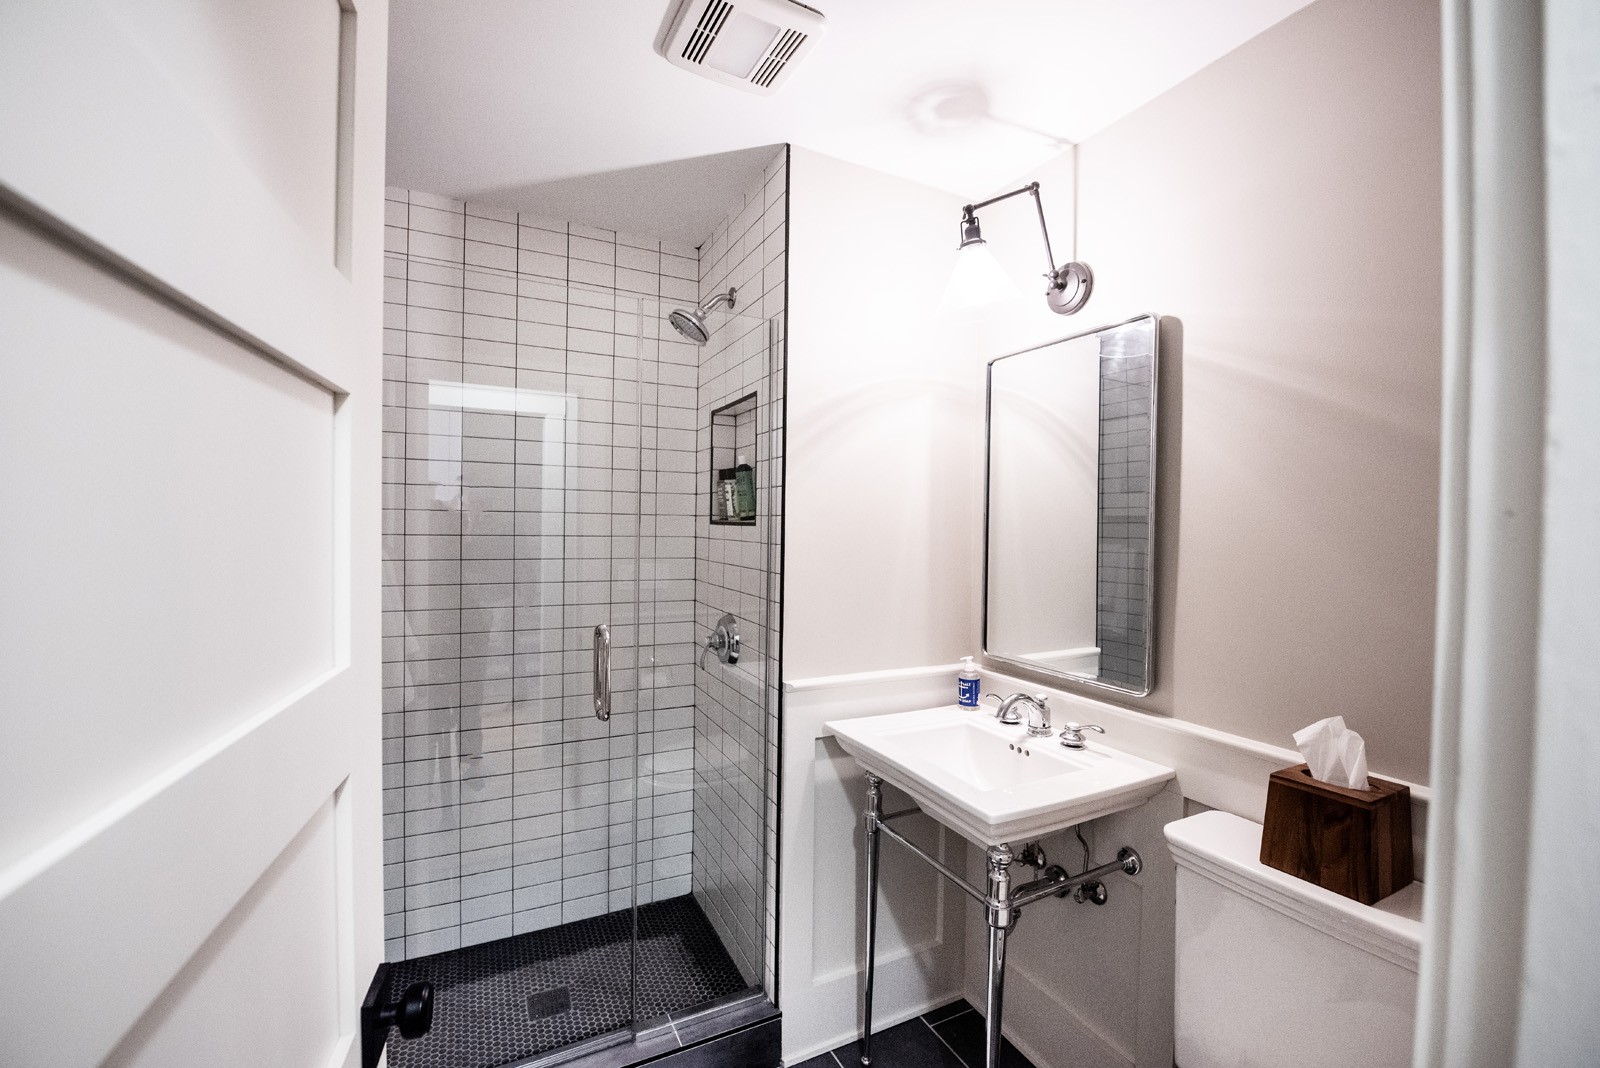 clean bathroom shower with glass door & subway tiles chrome finishes small mirror over open vanity